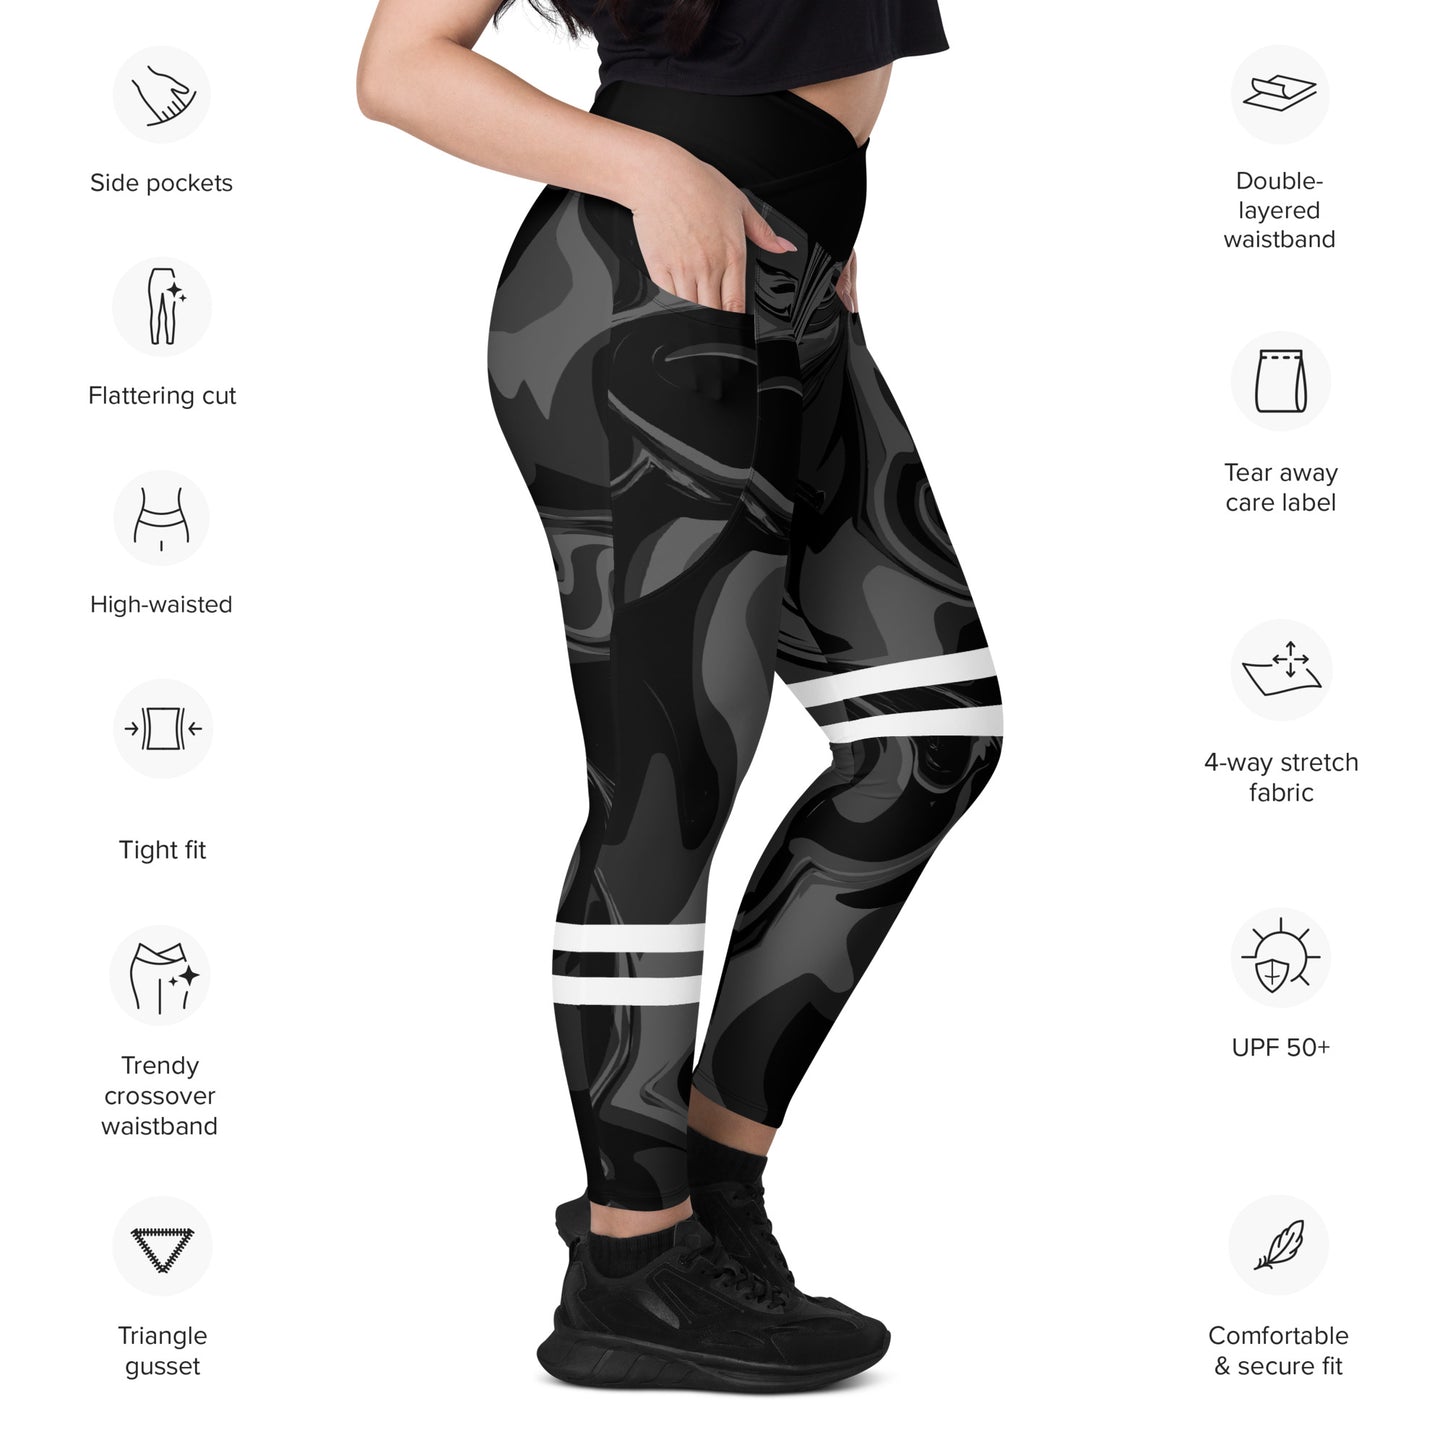 Black Marble Print High Waist Crossover leggings with pockets